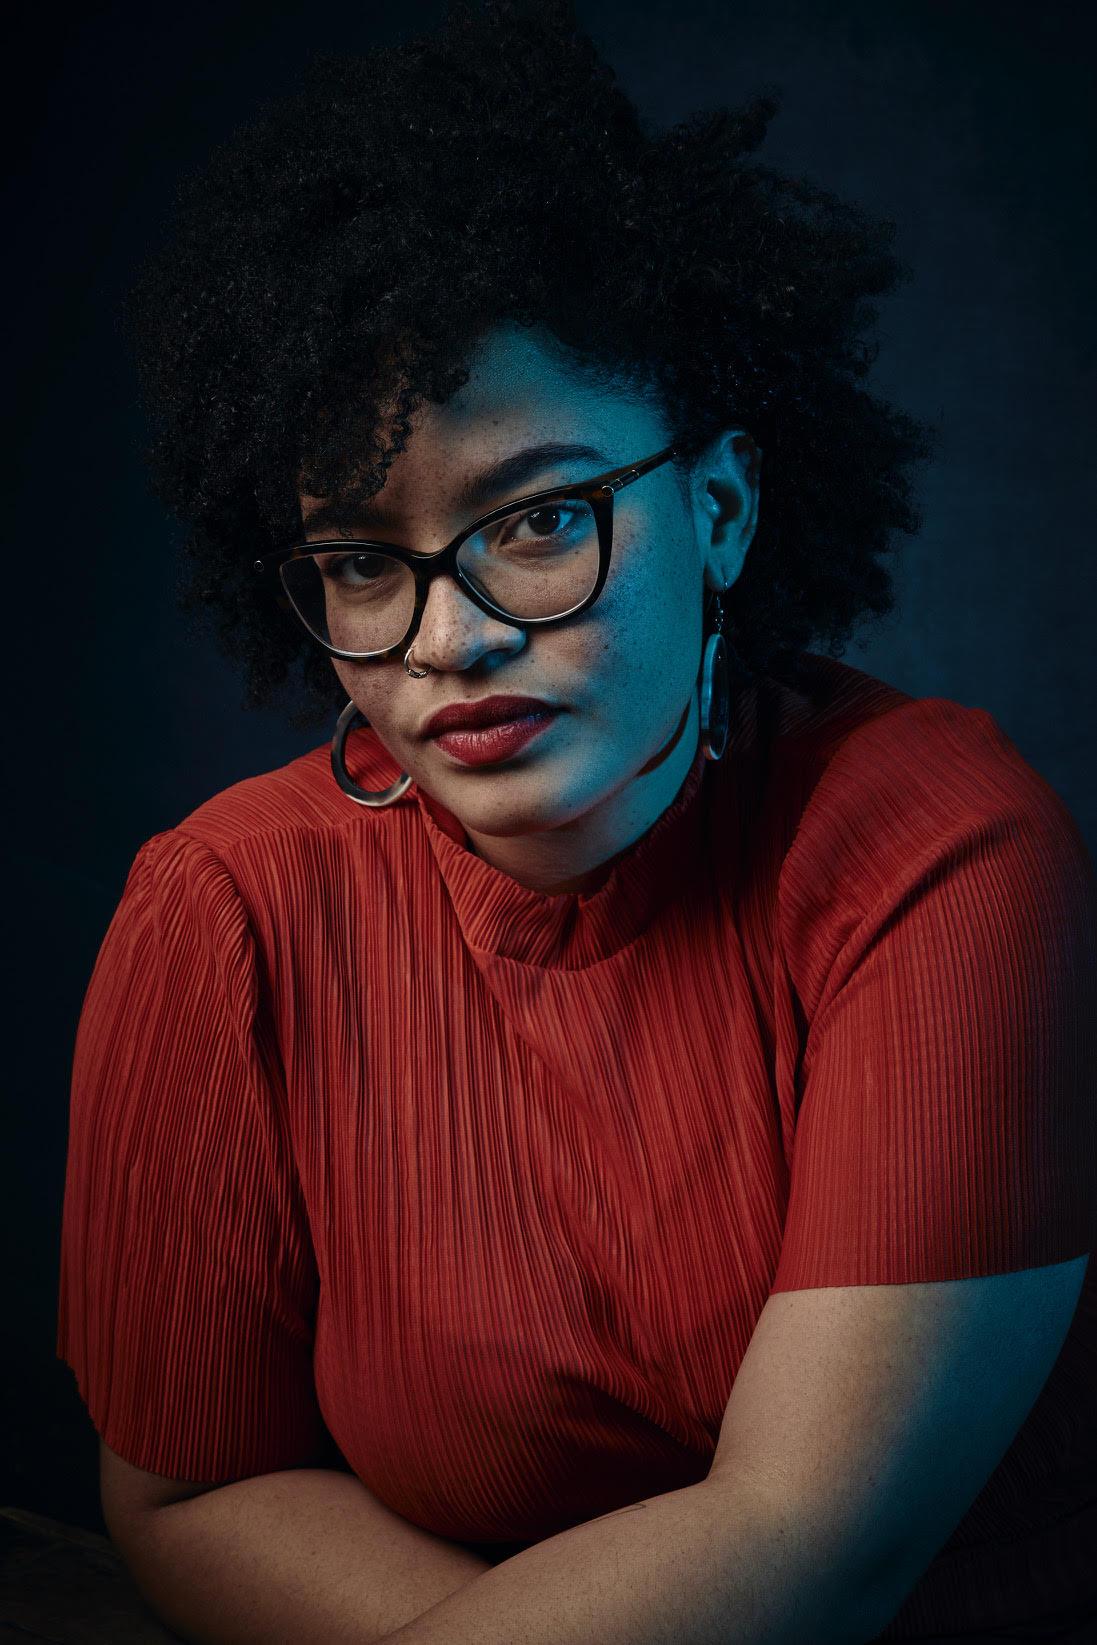 A person with a brown skin and dark curly hair wearing black glasses and a red shirt.